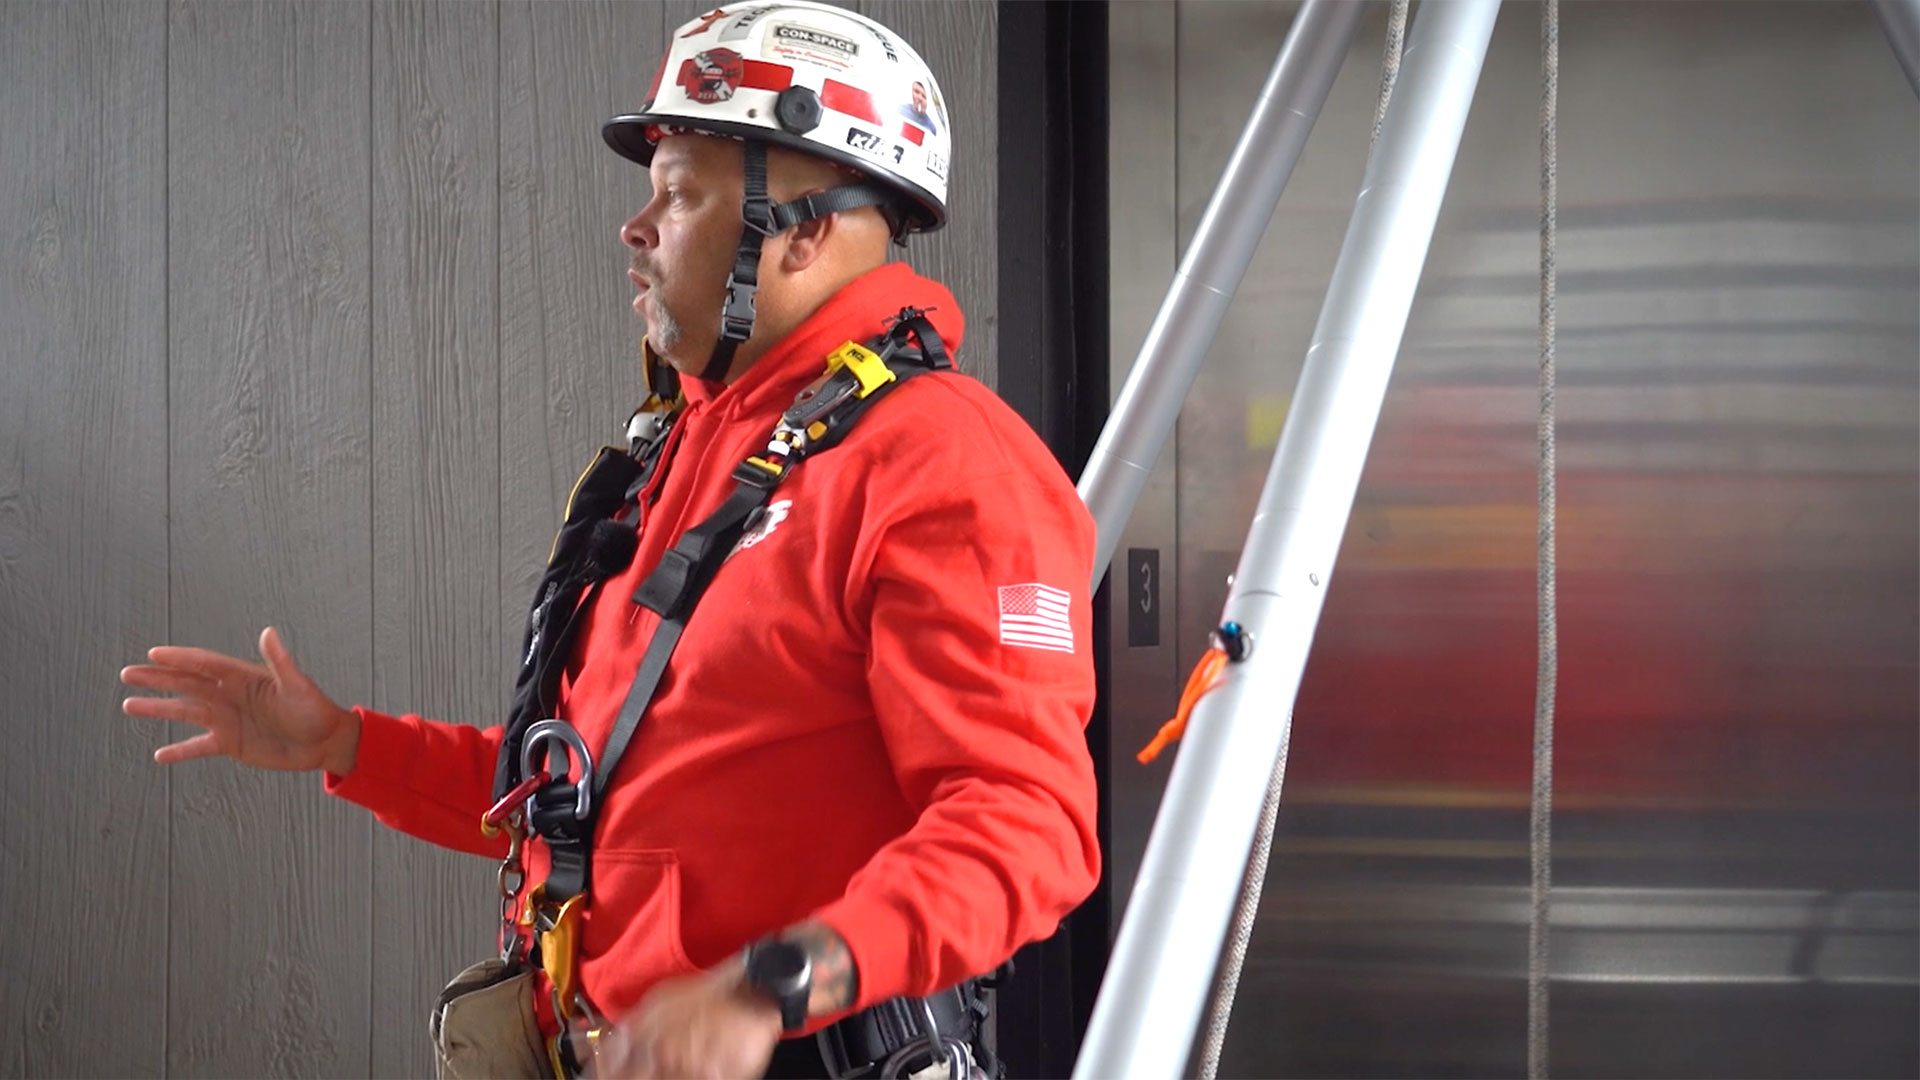 Featured image for “Elevator Rope Rescue (Part 1 of 6) | Trapped in Elevator | Firefighter Elevator Rescue Training”